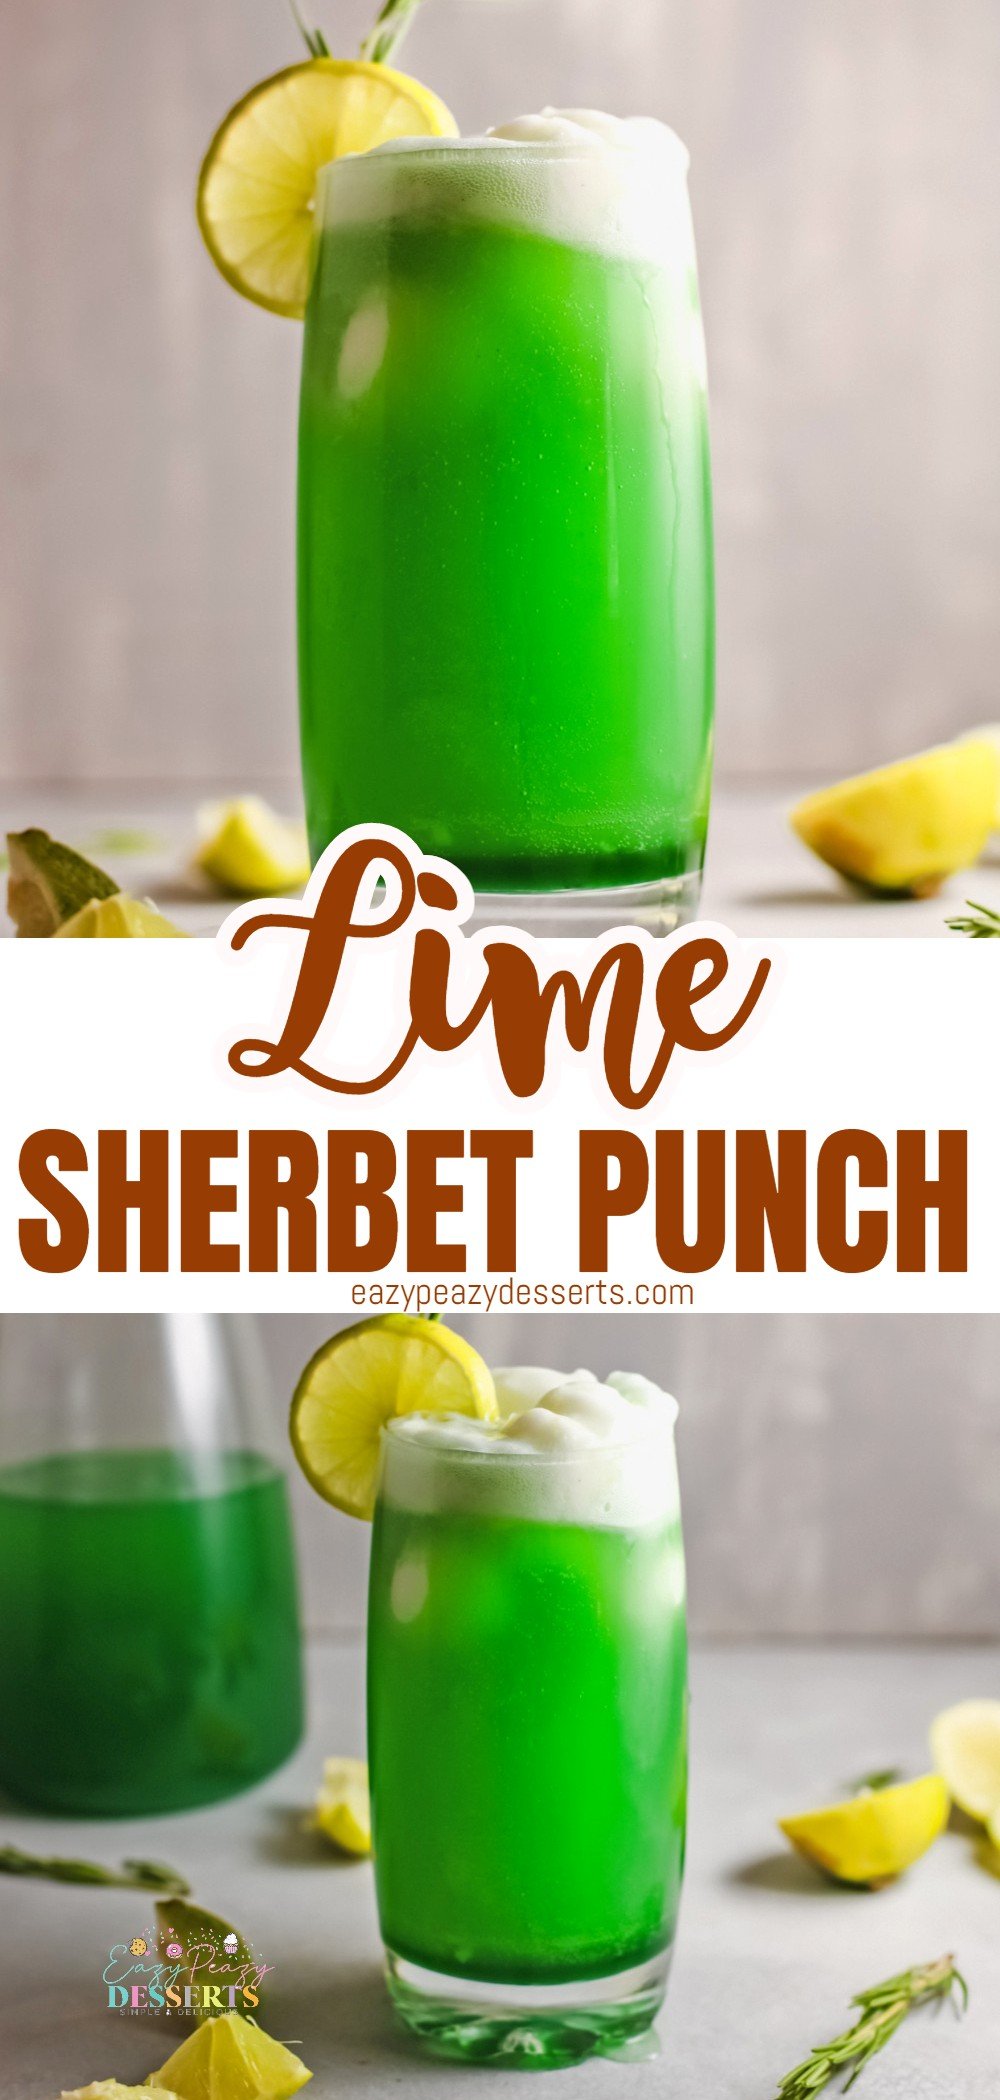 Photo collage of a glass of green lime sherbet punch decorate with limes, lemons and rosemary